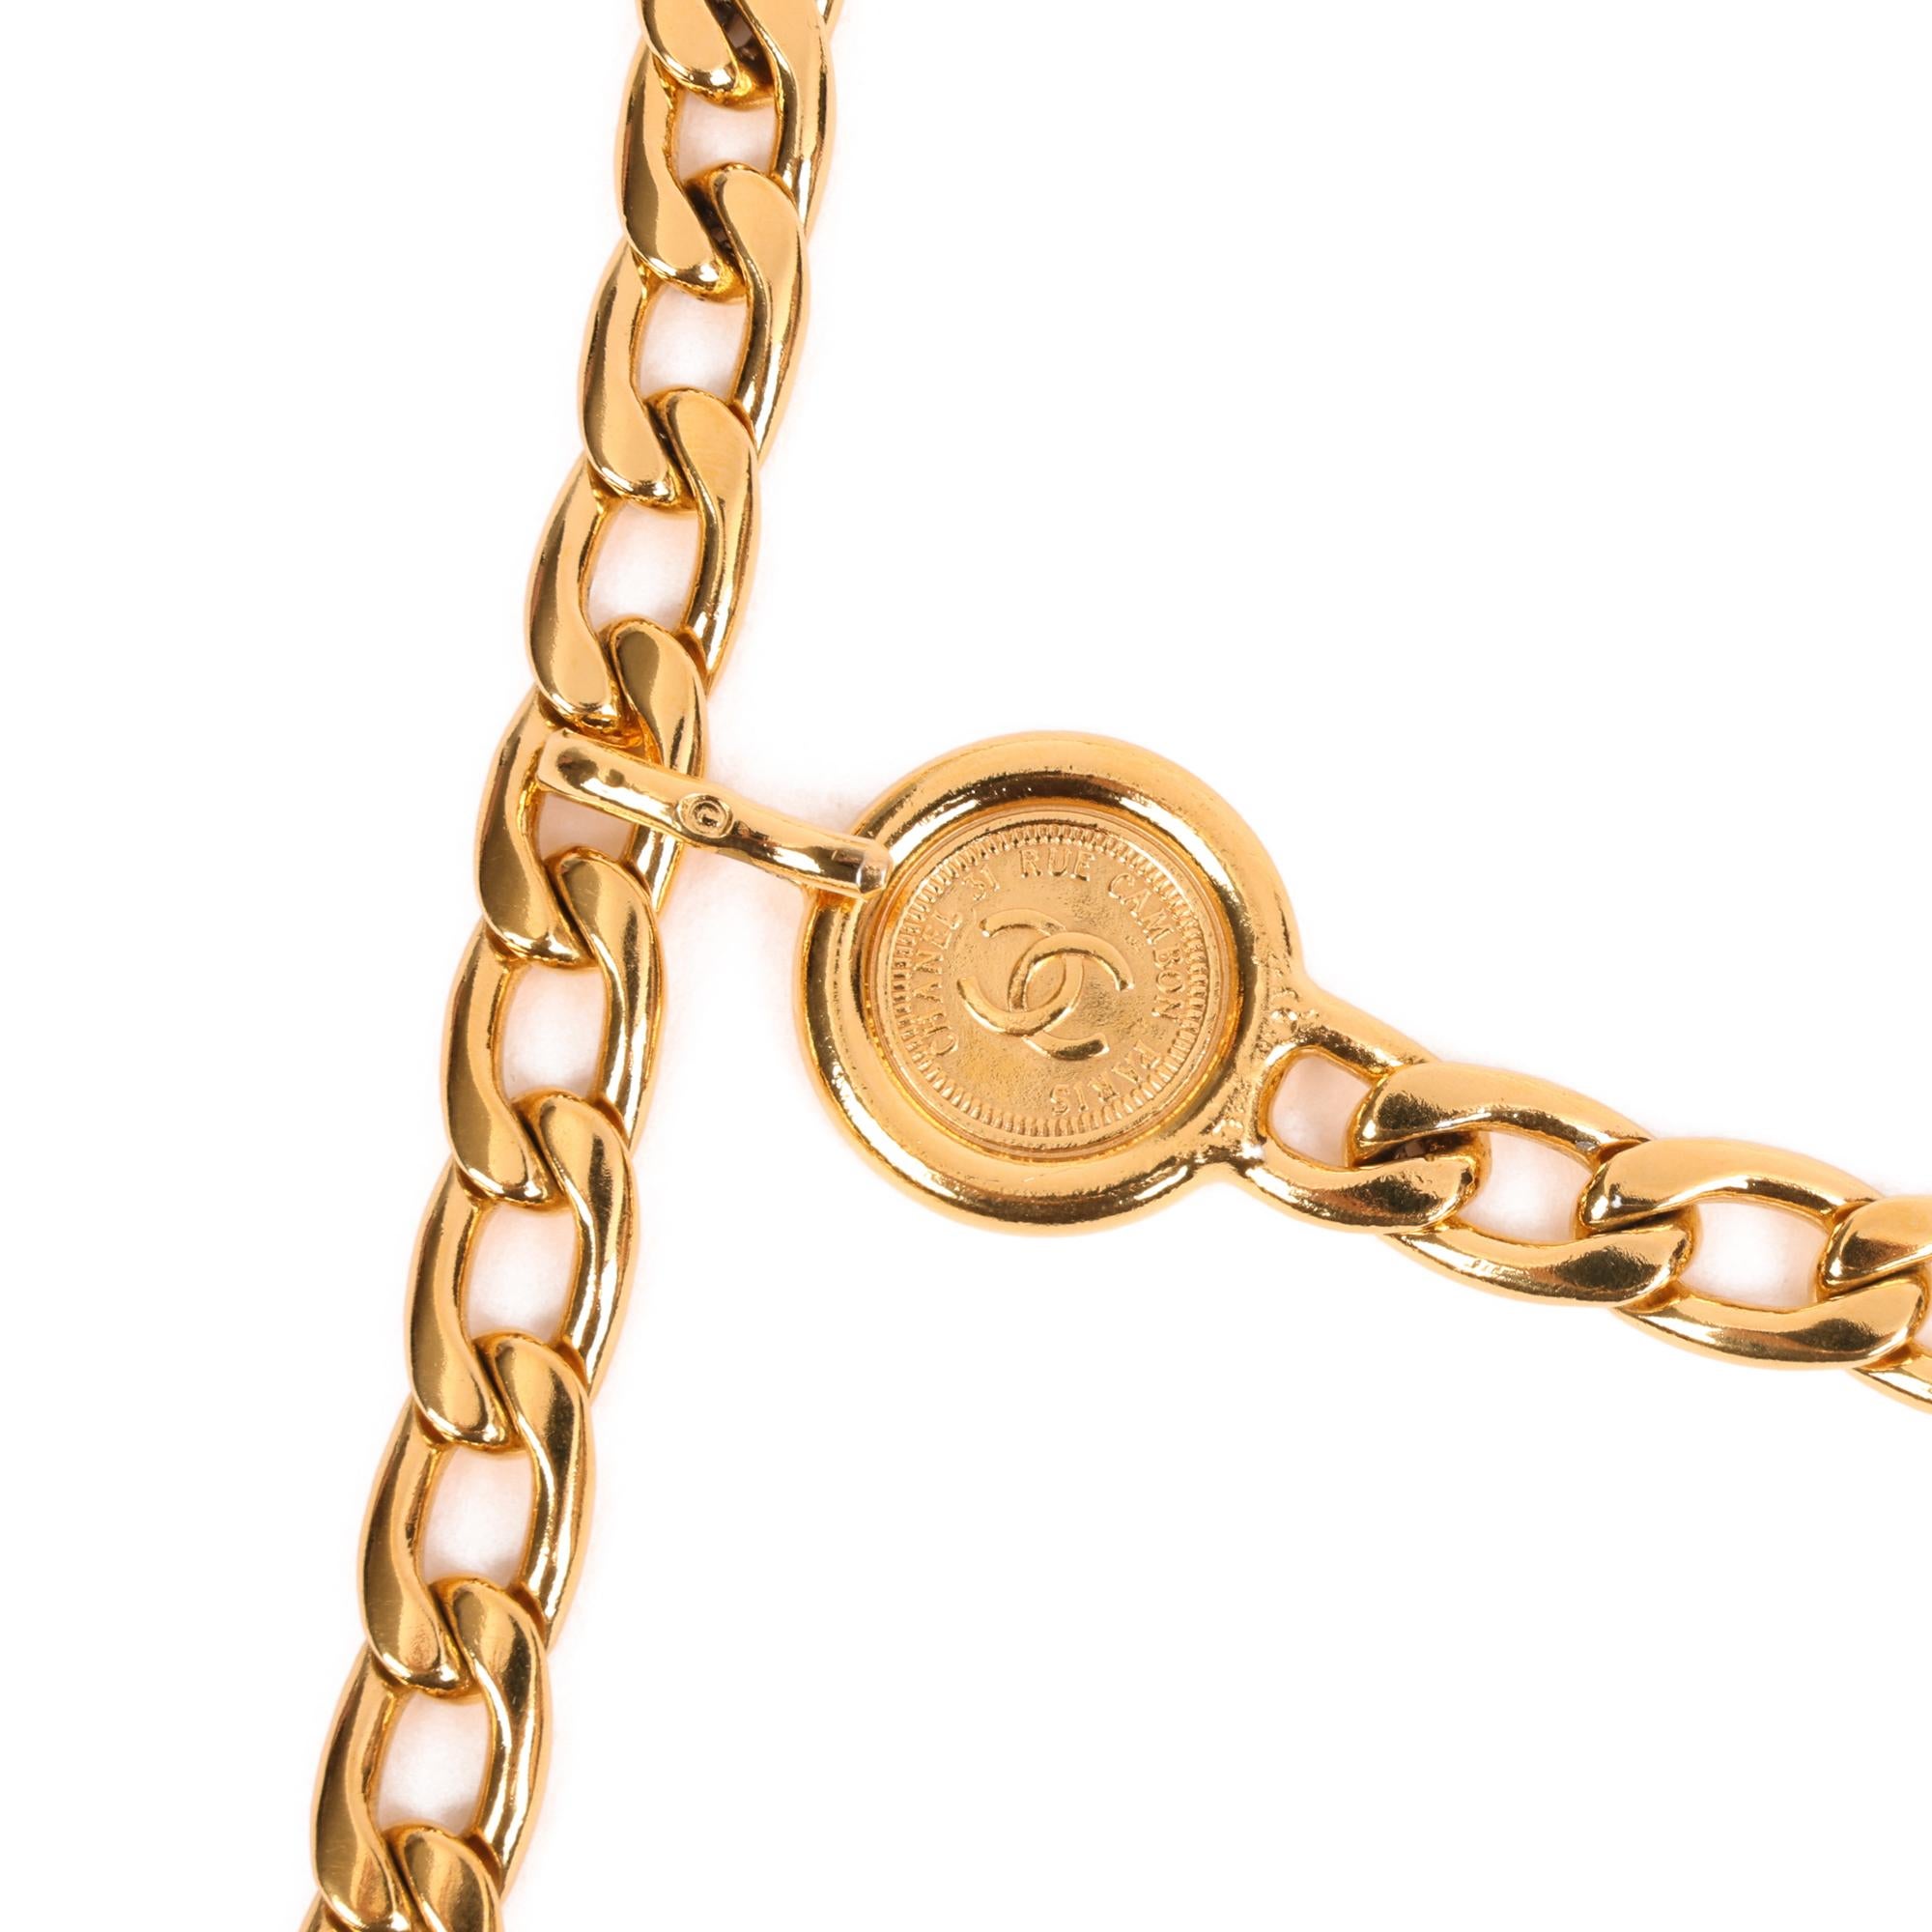 Chanel GOLD MEDALLION COIN VINTAGE CHAIN BELT

CONDITION NOTES
The hardware is in very good condition with light signs of use. The Hardware shows slight signs of tarnishing.
Overall this item is in very good pre-owned condition. Please note the